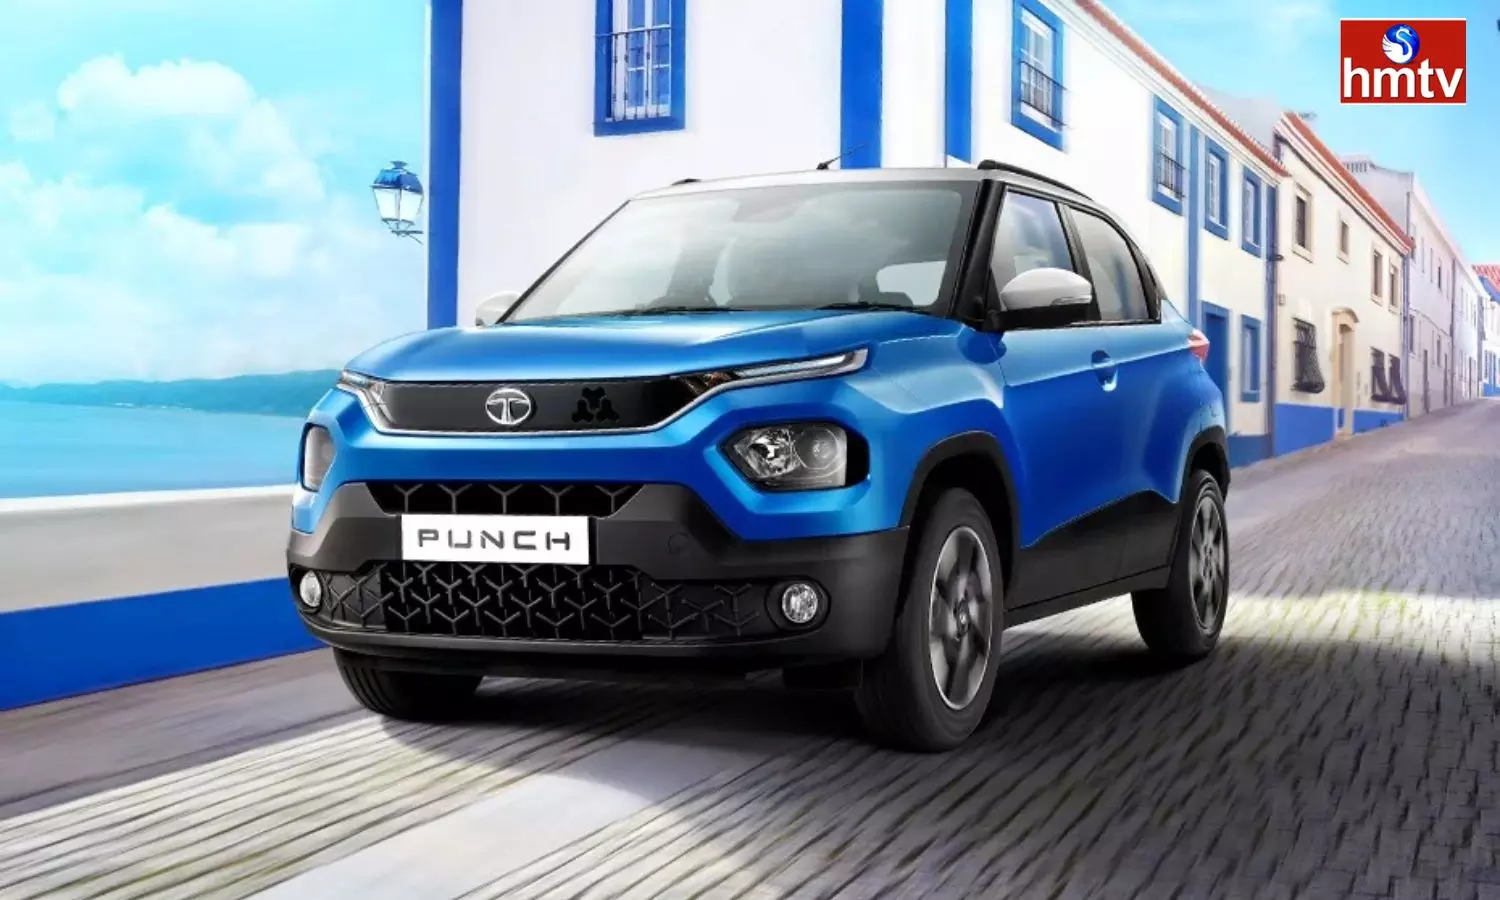 Tata Punch SUV with 5-star safety rating in low budget check price and features